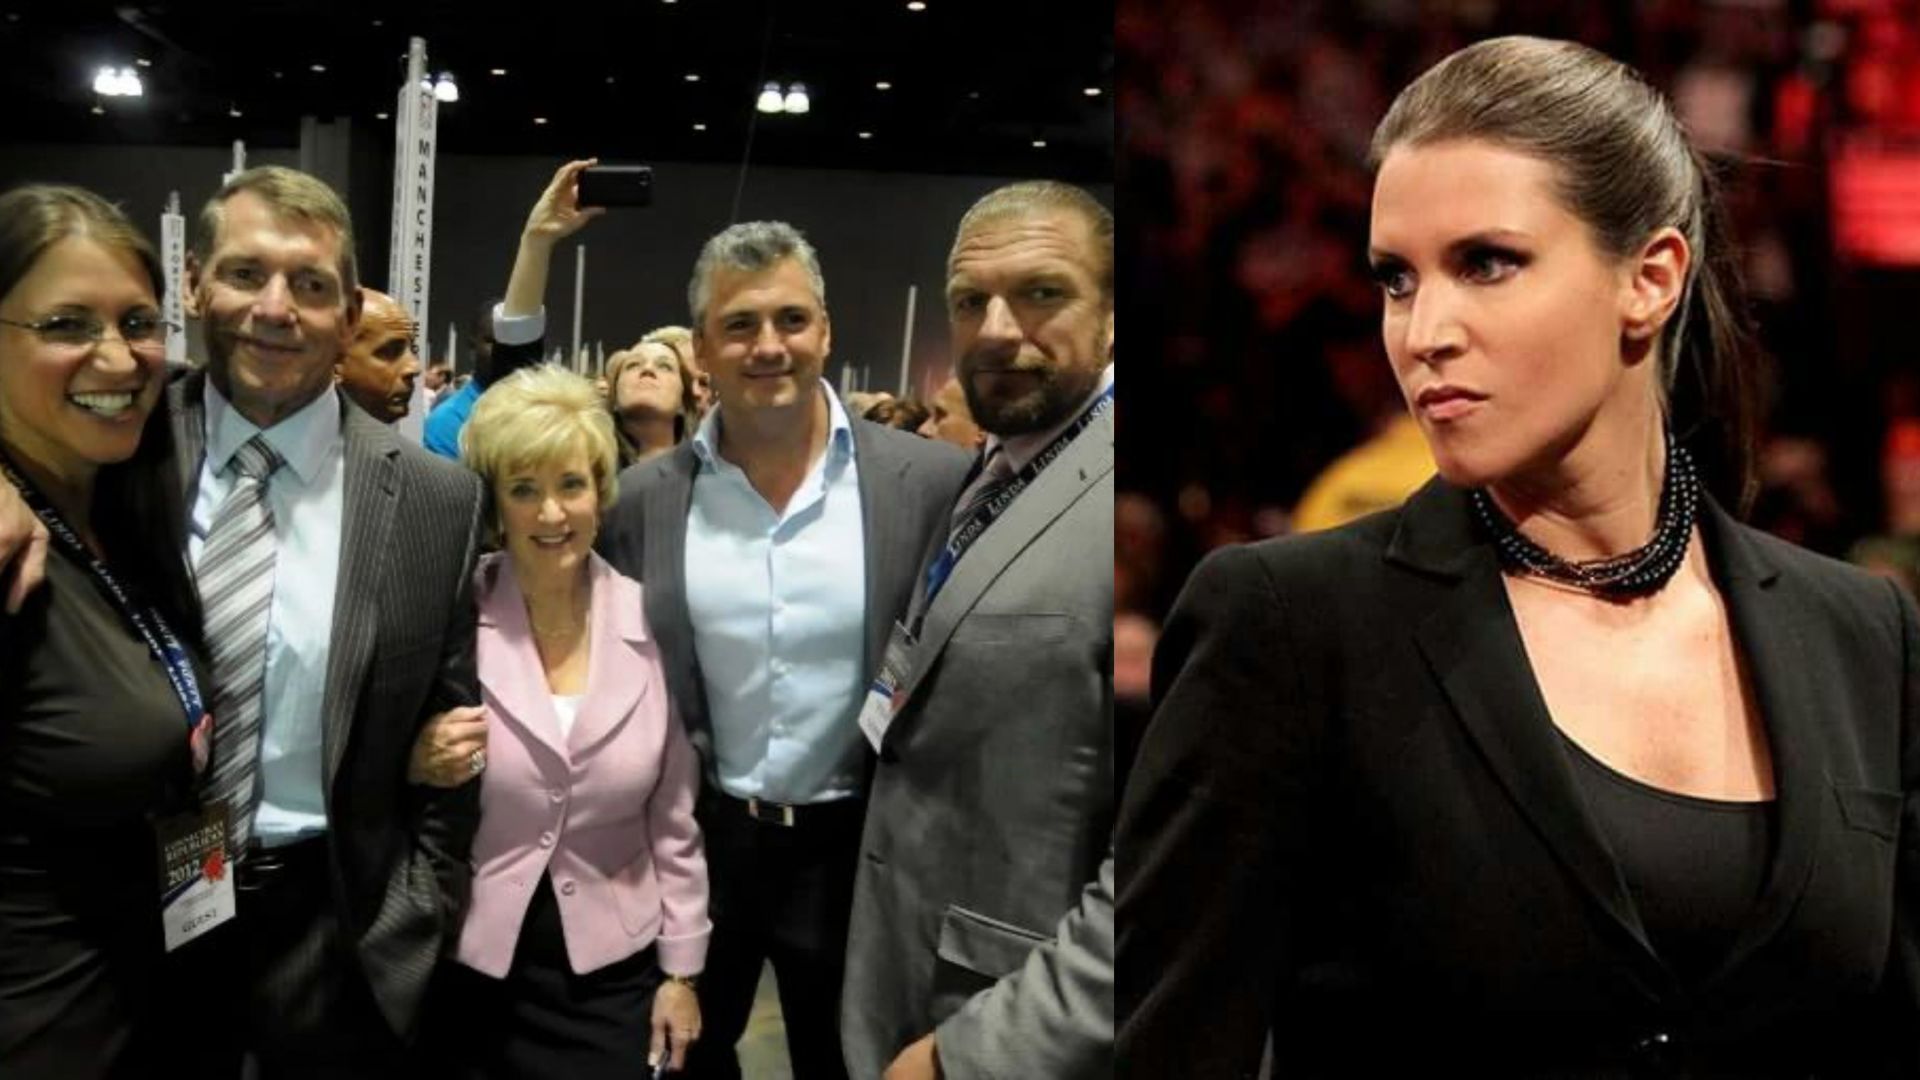 The McMahon family (left) and WWE Chairwoman and Co-CEO Stephanie McMahon (right)